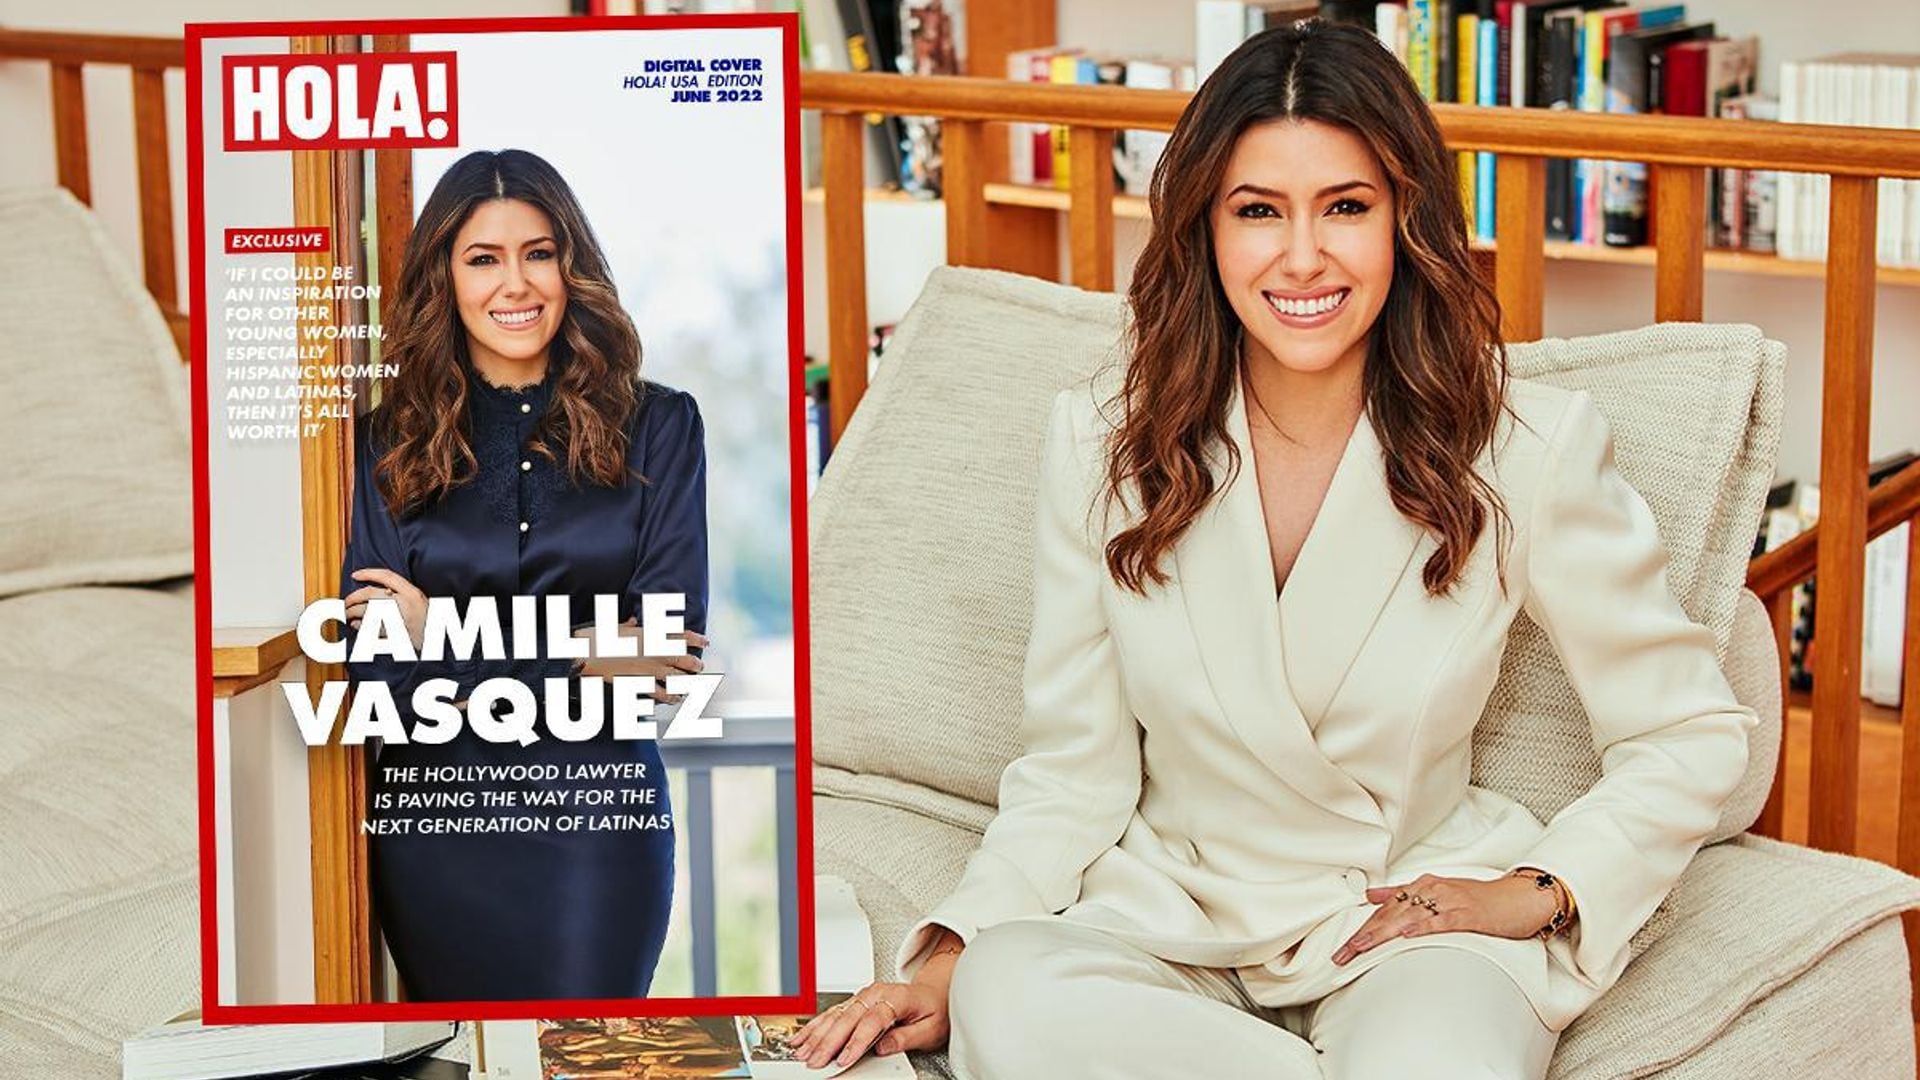 Camille Vasquez: the successful Hollywood lawyer paving the way for the new generation of Latinas